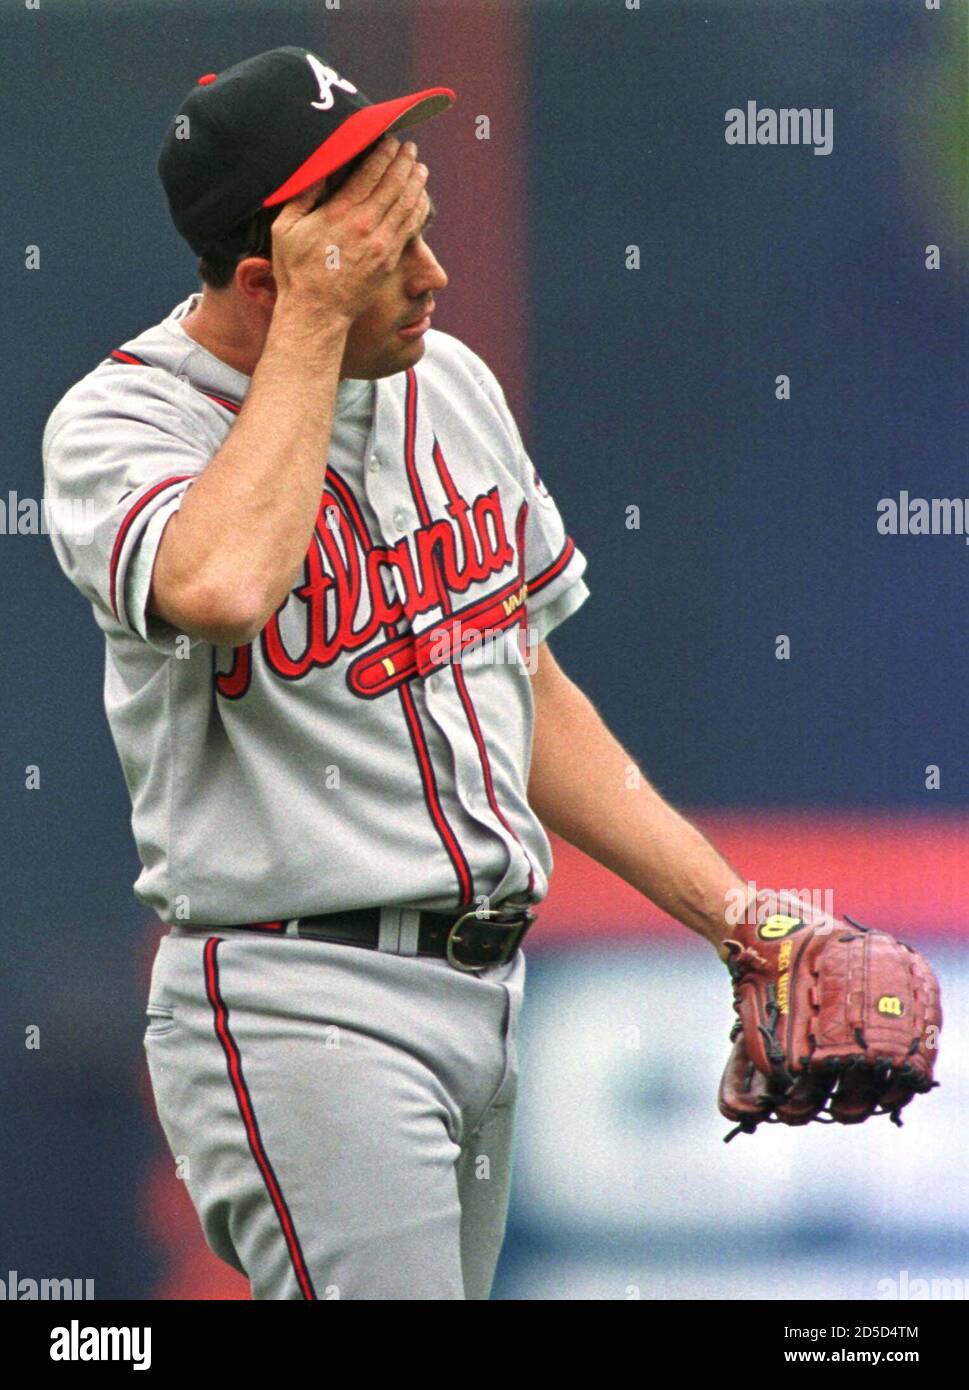 Atlanta Braves pitcher Greg Maddux reacts after giving up a FBI double to San Diego Padres' Quilvio Veras in the fifth inning of the May 9 game in San Diego. Maddux was roughed up by the Padres giving up six runs on five hits with two strikeouts and two walks in six innings. Maddux was also hit by a pitch from Padres pitcher Sterling Hitchcock, nearly setting off a fight.  JTL/JP Stock Photo